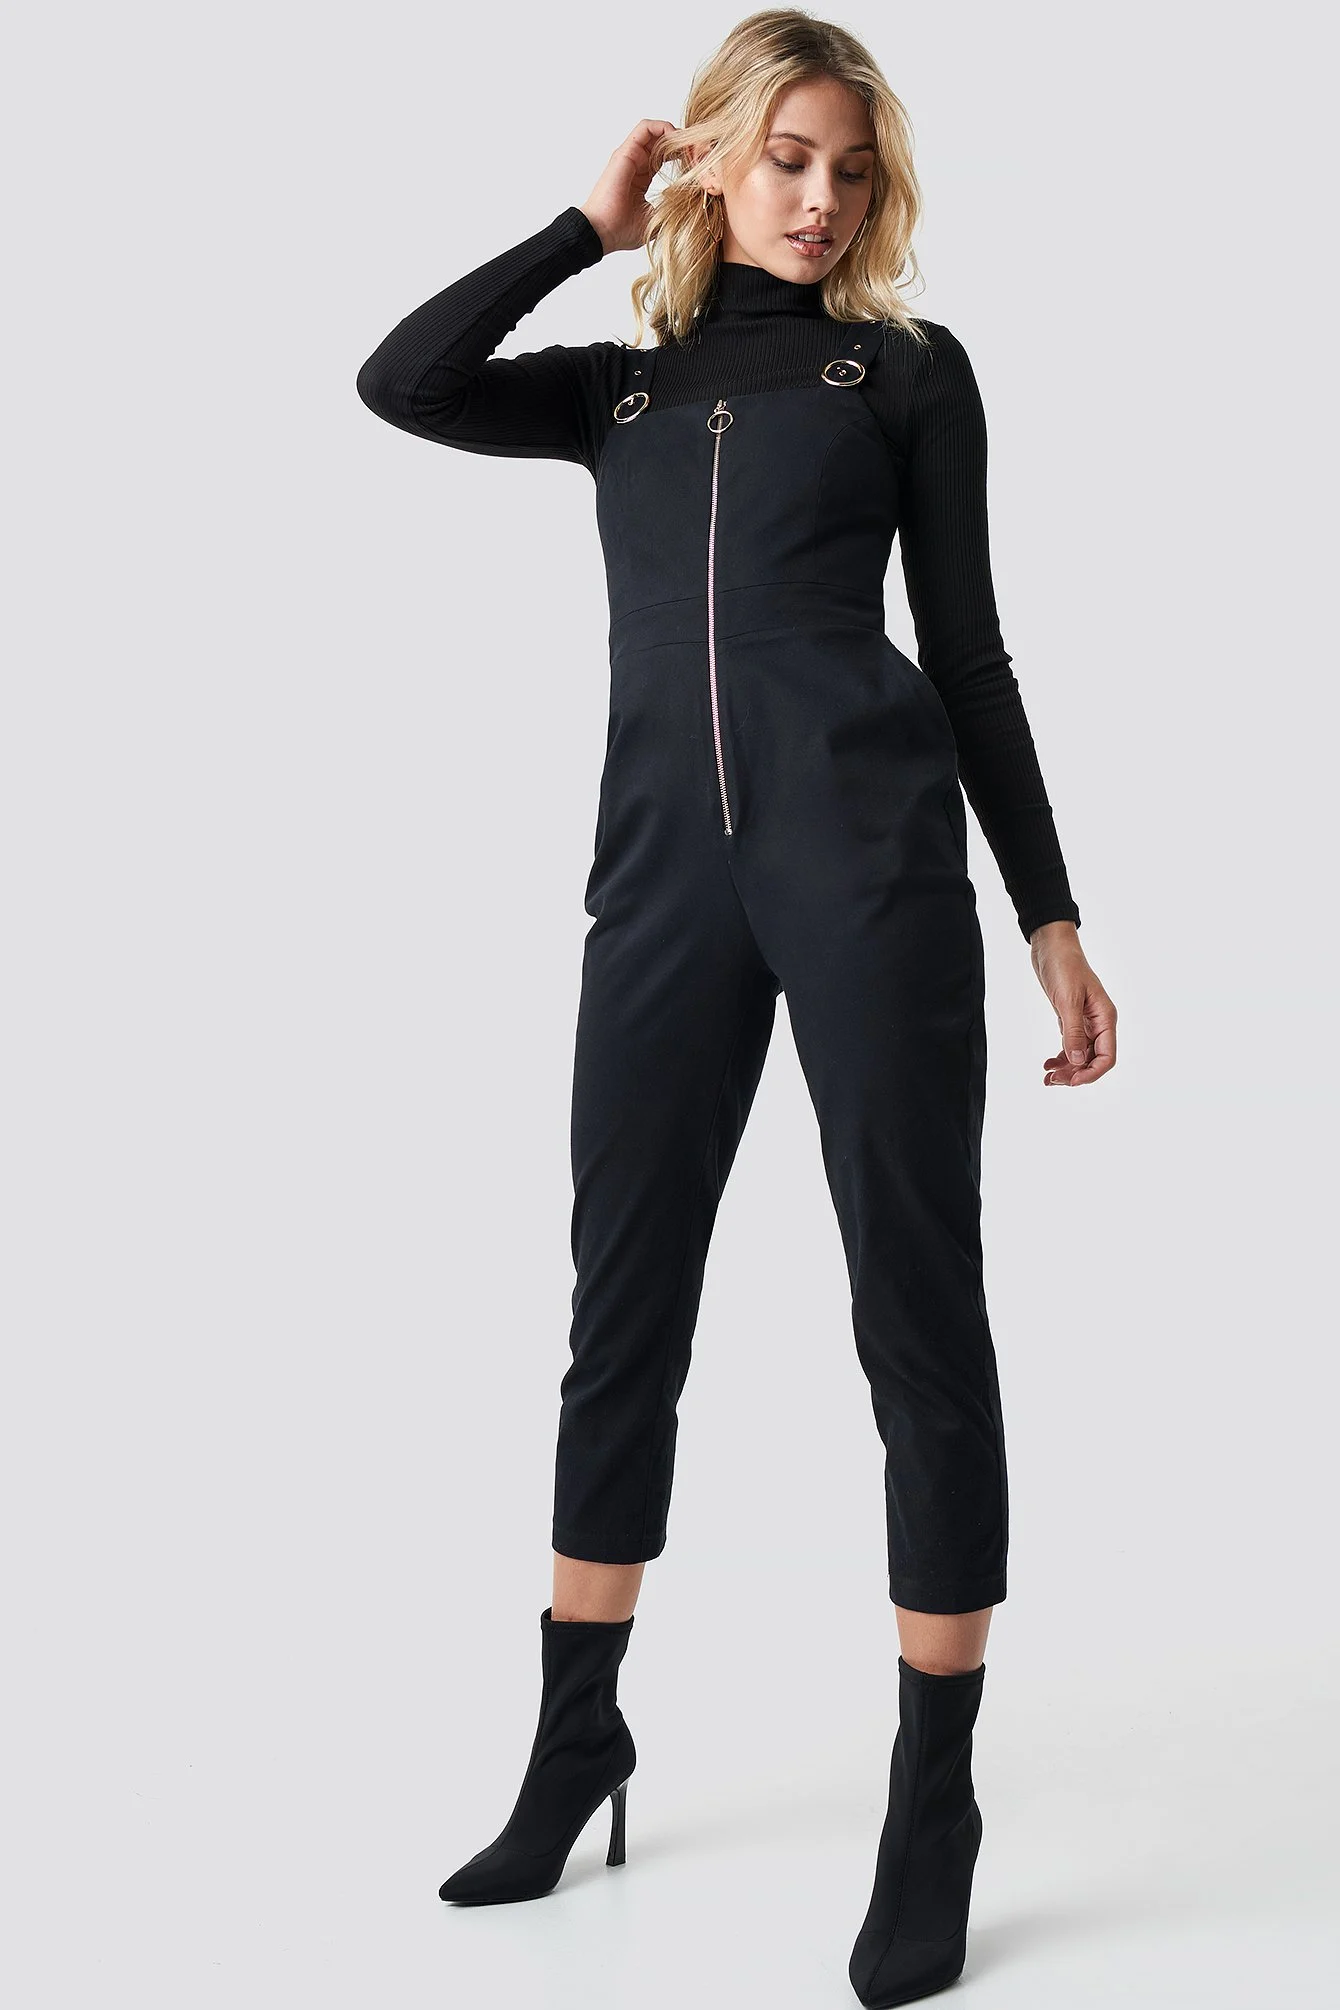 Front Zip Detailed Jumpsuit Outfit.